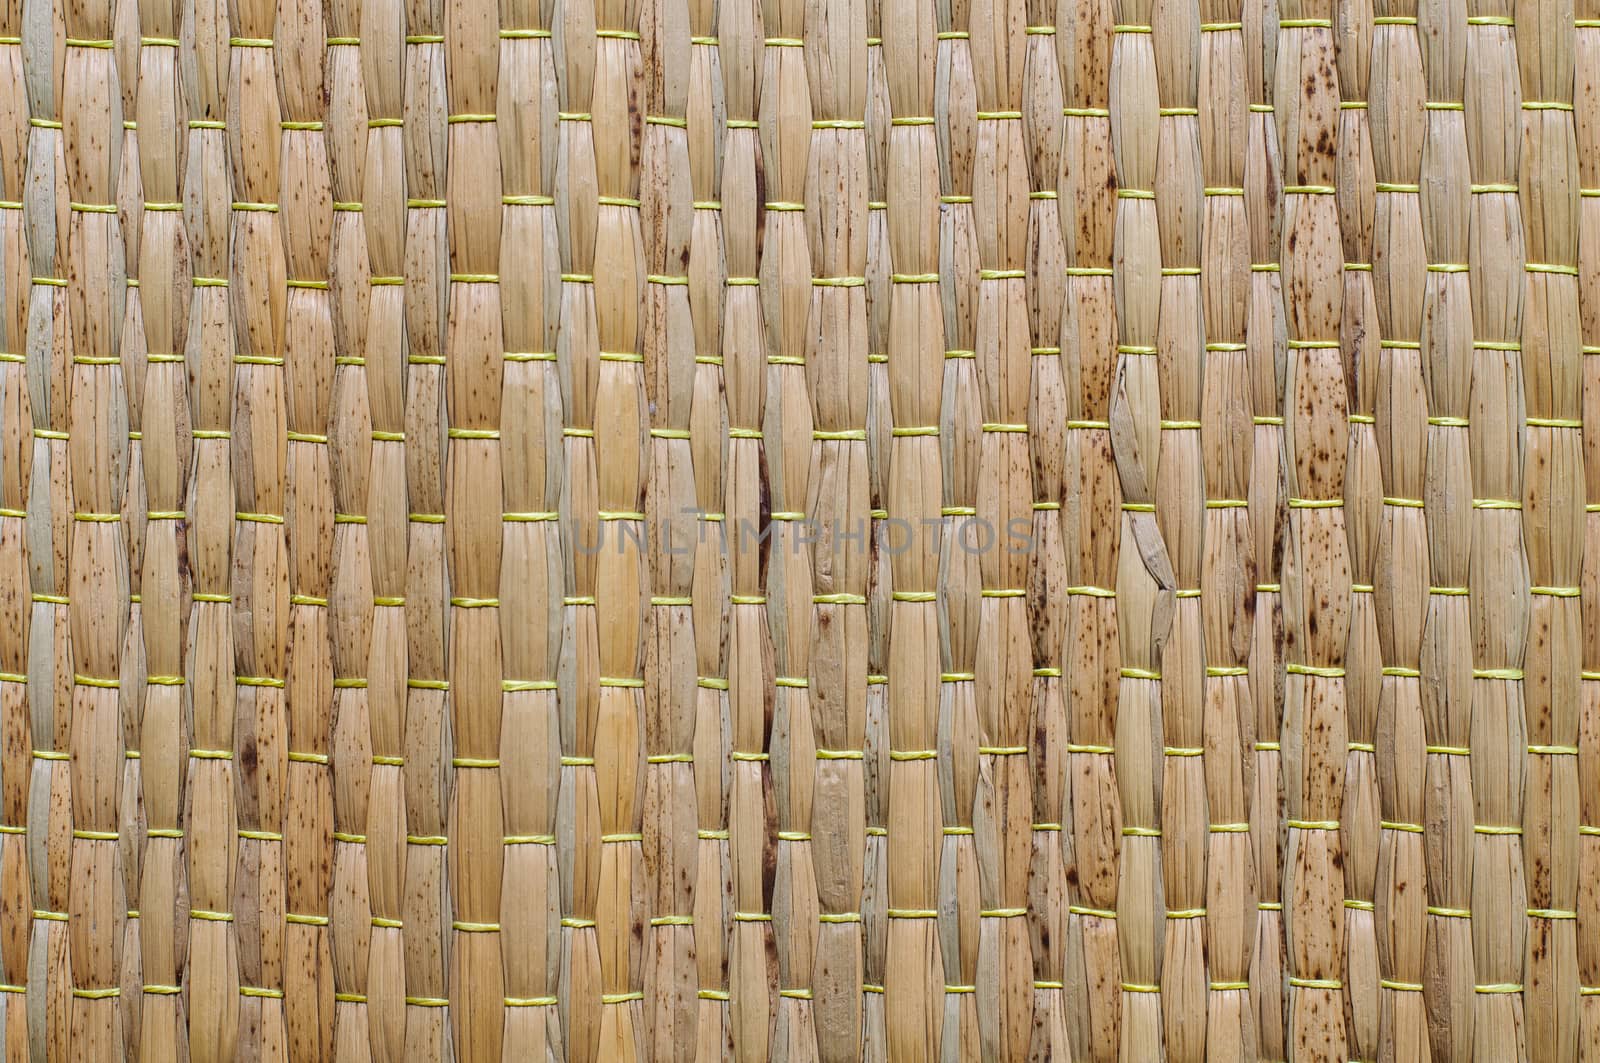 Bamboo mat, may be used as background